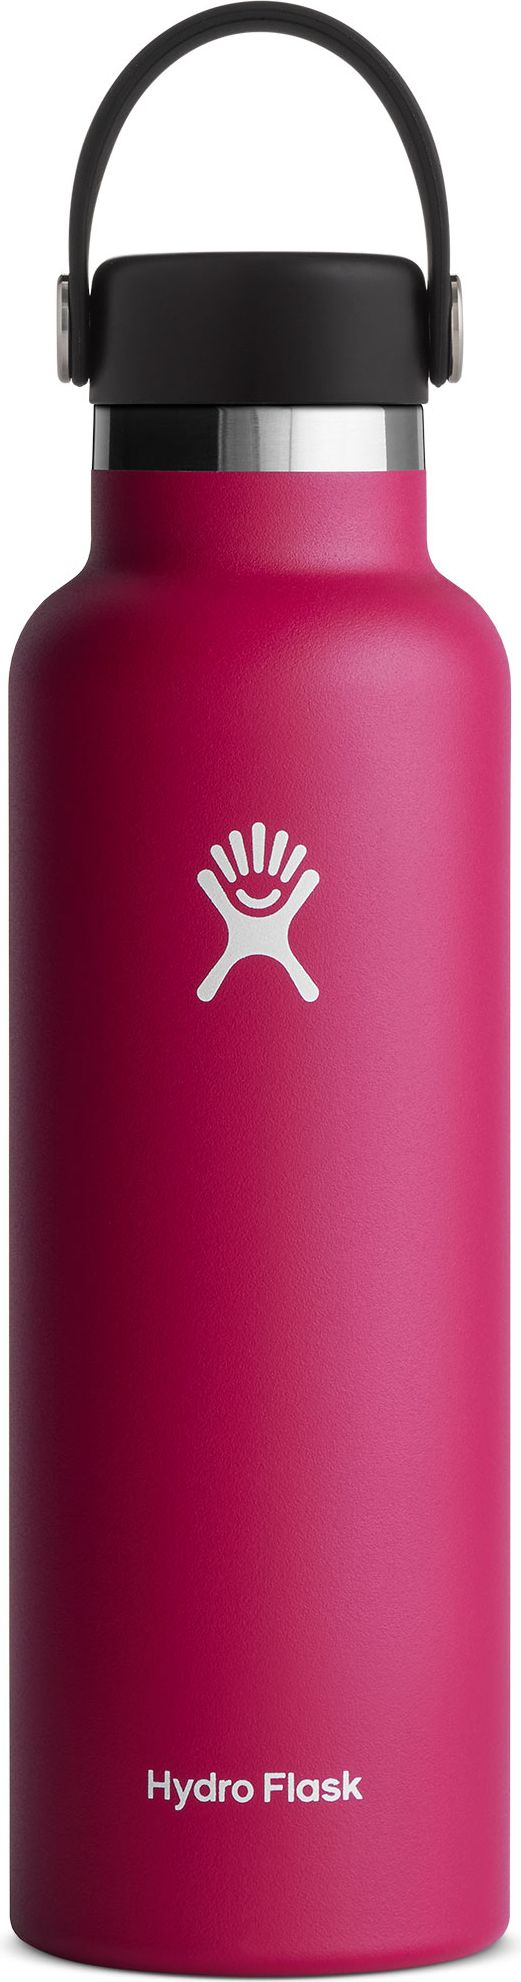 Hydroflask 21oz standard mouth bottle White Color